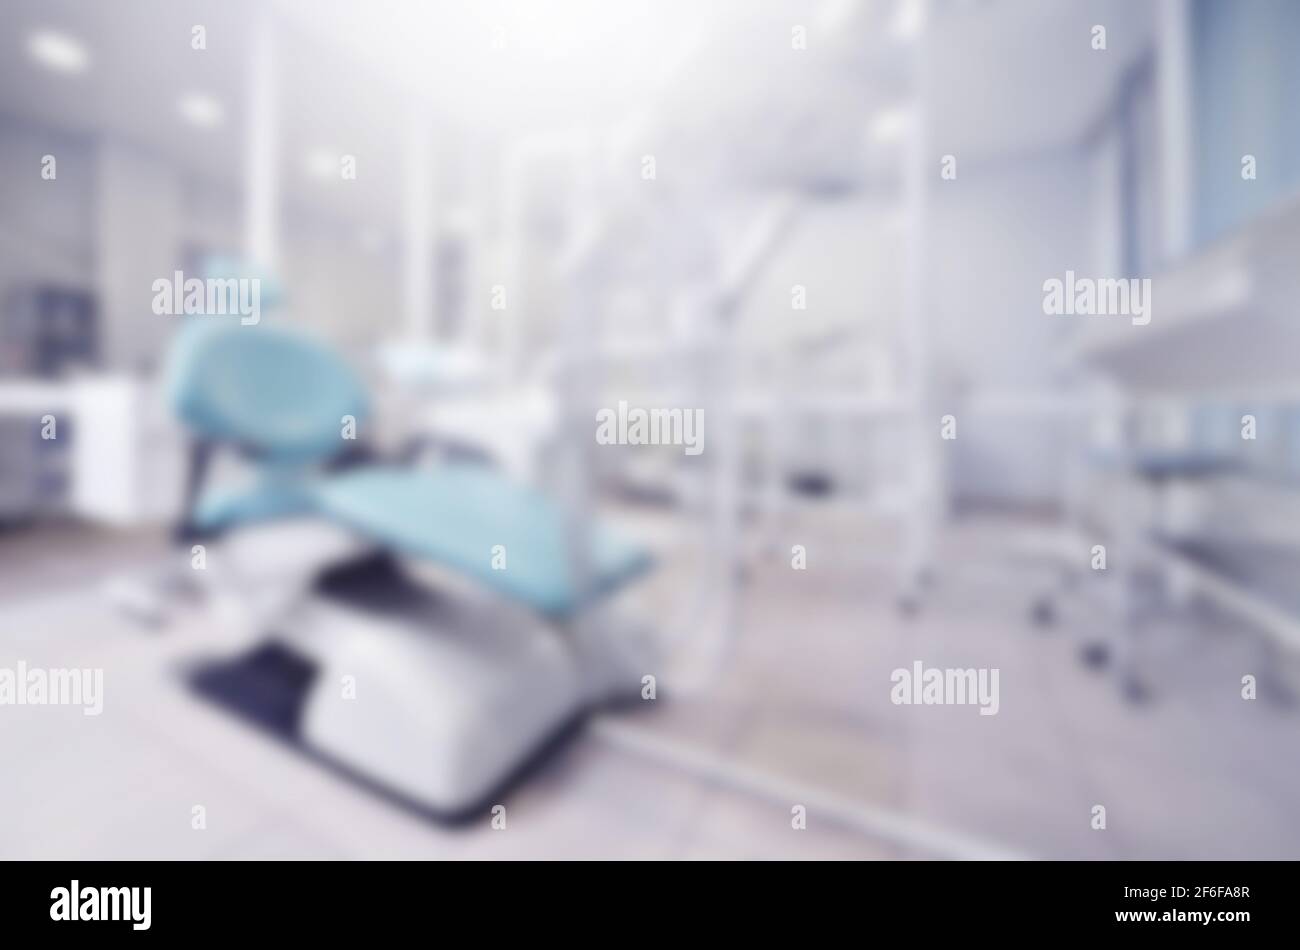 Abstract blurred background of dental office Stock Photo